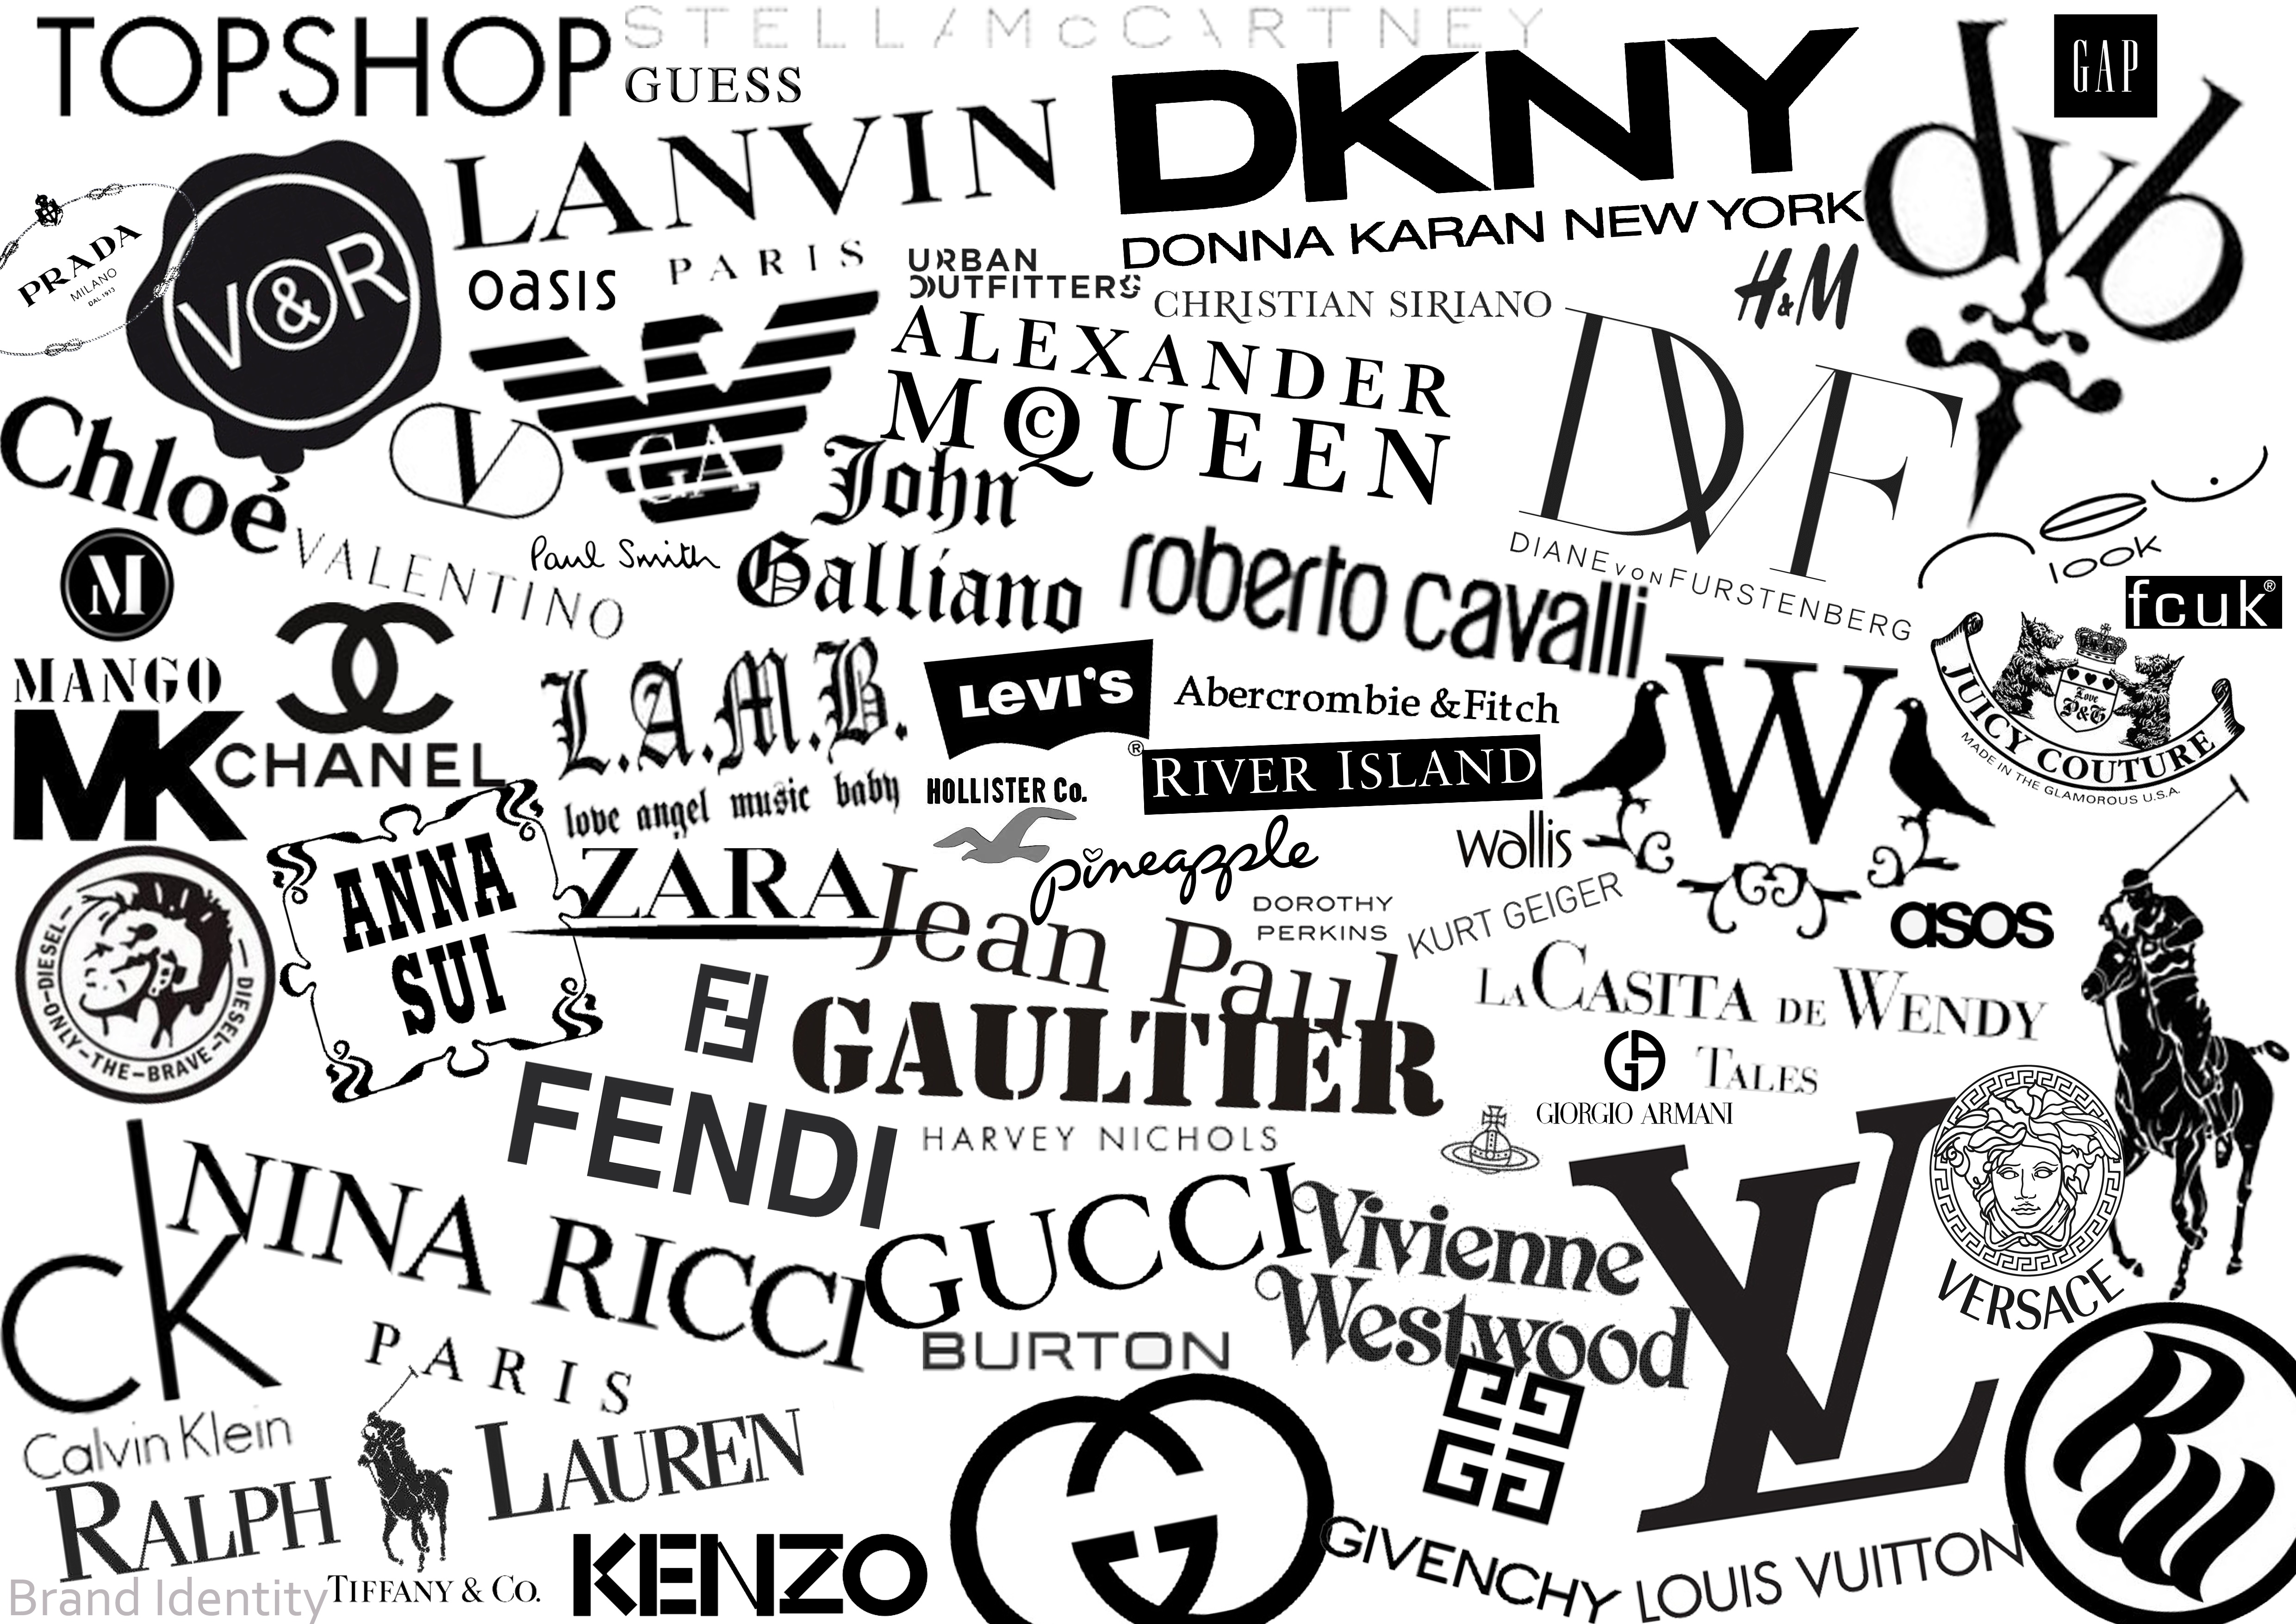 The 10 Most Valuable Fashion Brands of 2014 - OZONWeb by OZON Magazine